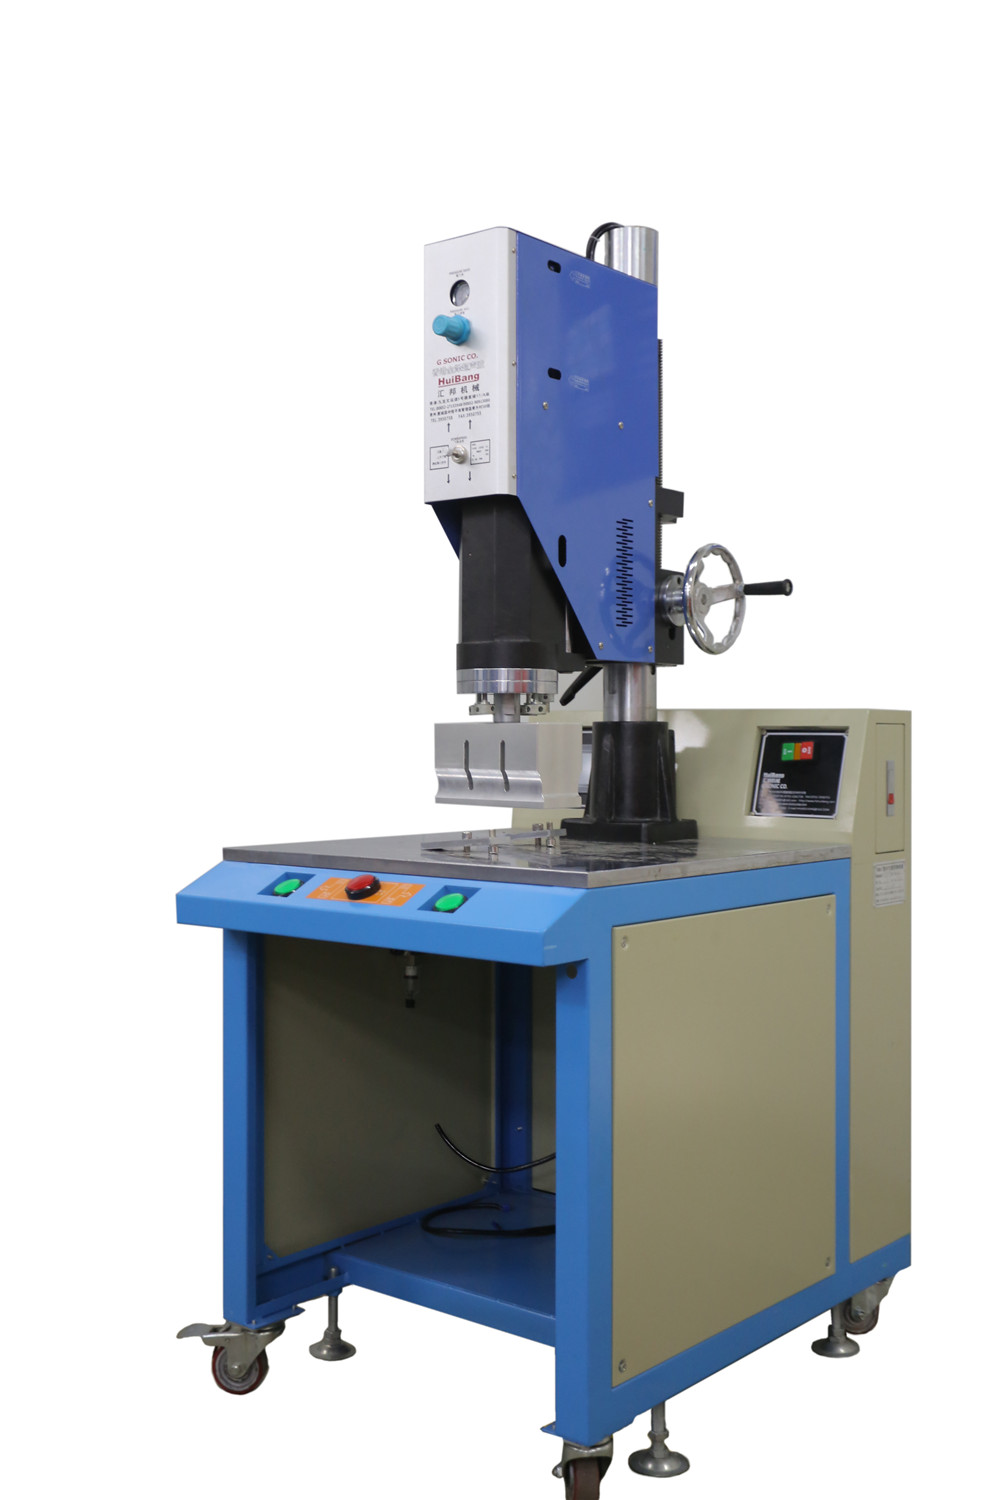 Huizhou Shengyang Industrial Co., Ltd Presents Different Types Of Automatic Screw Fastening Machines To Global Market